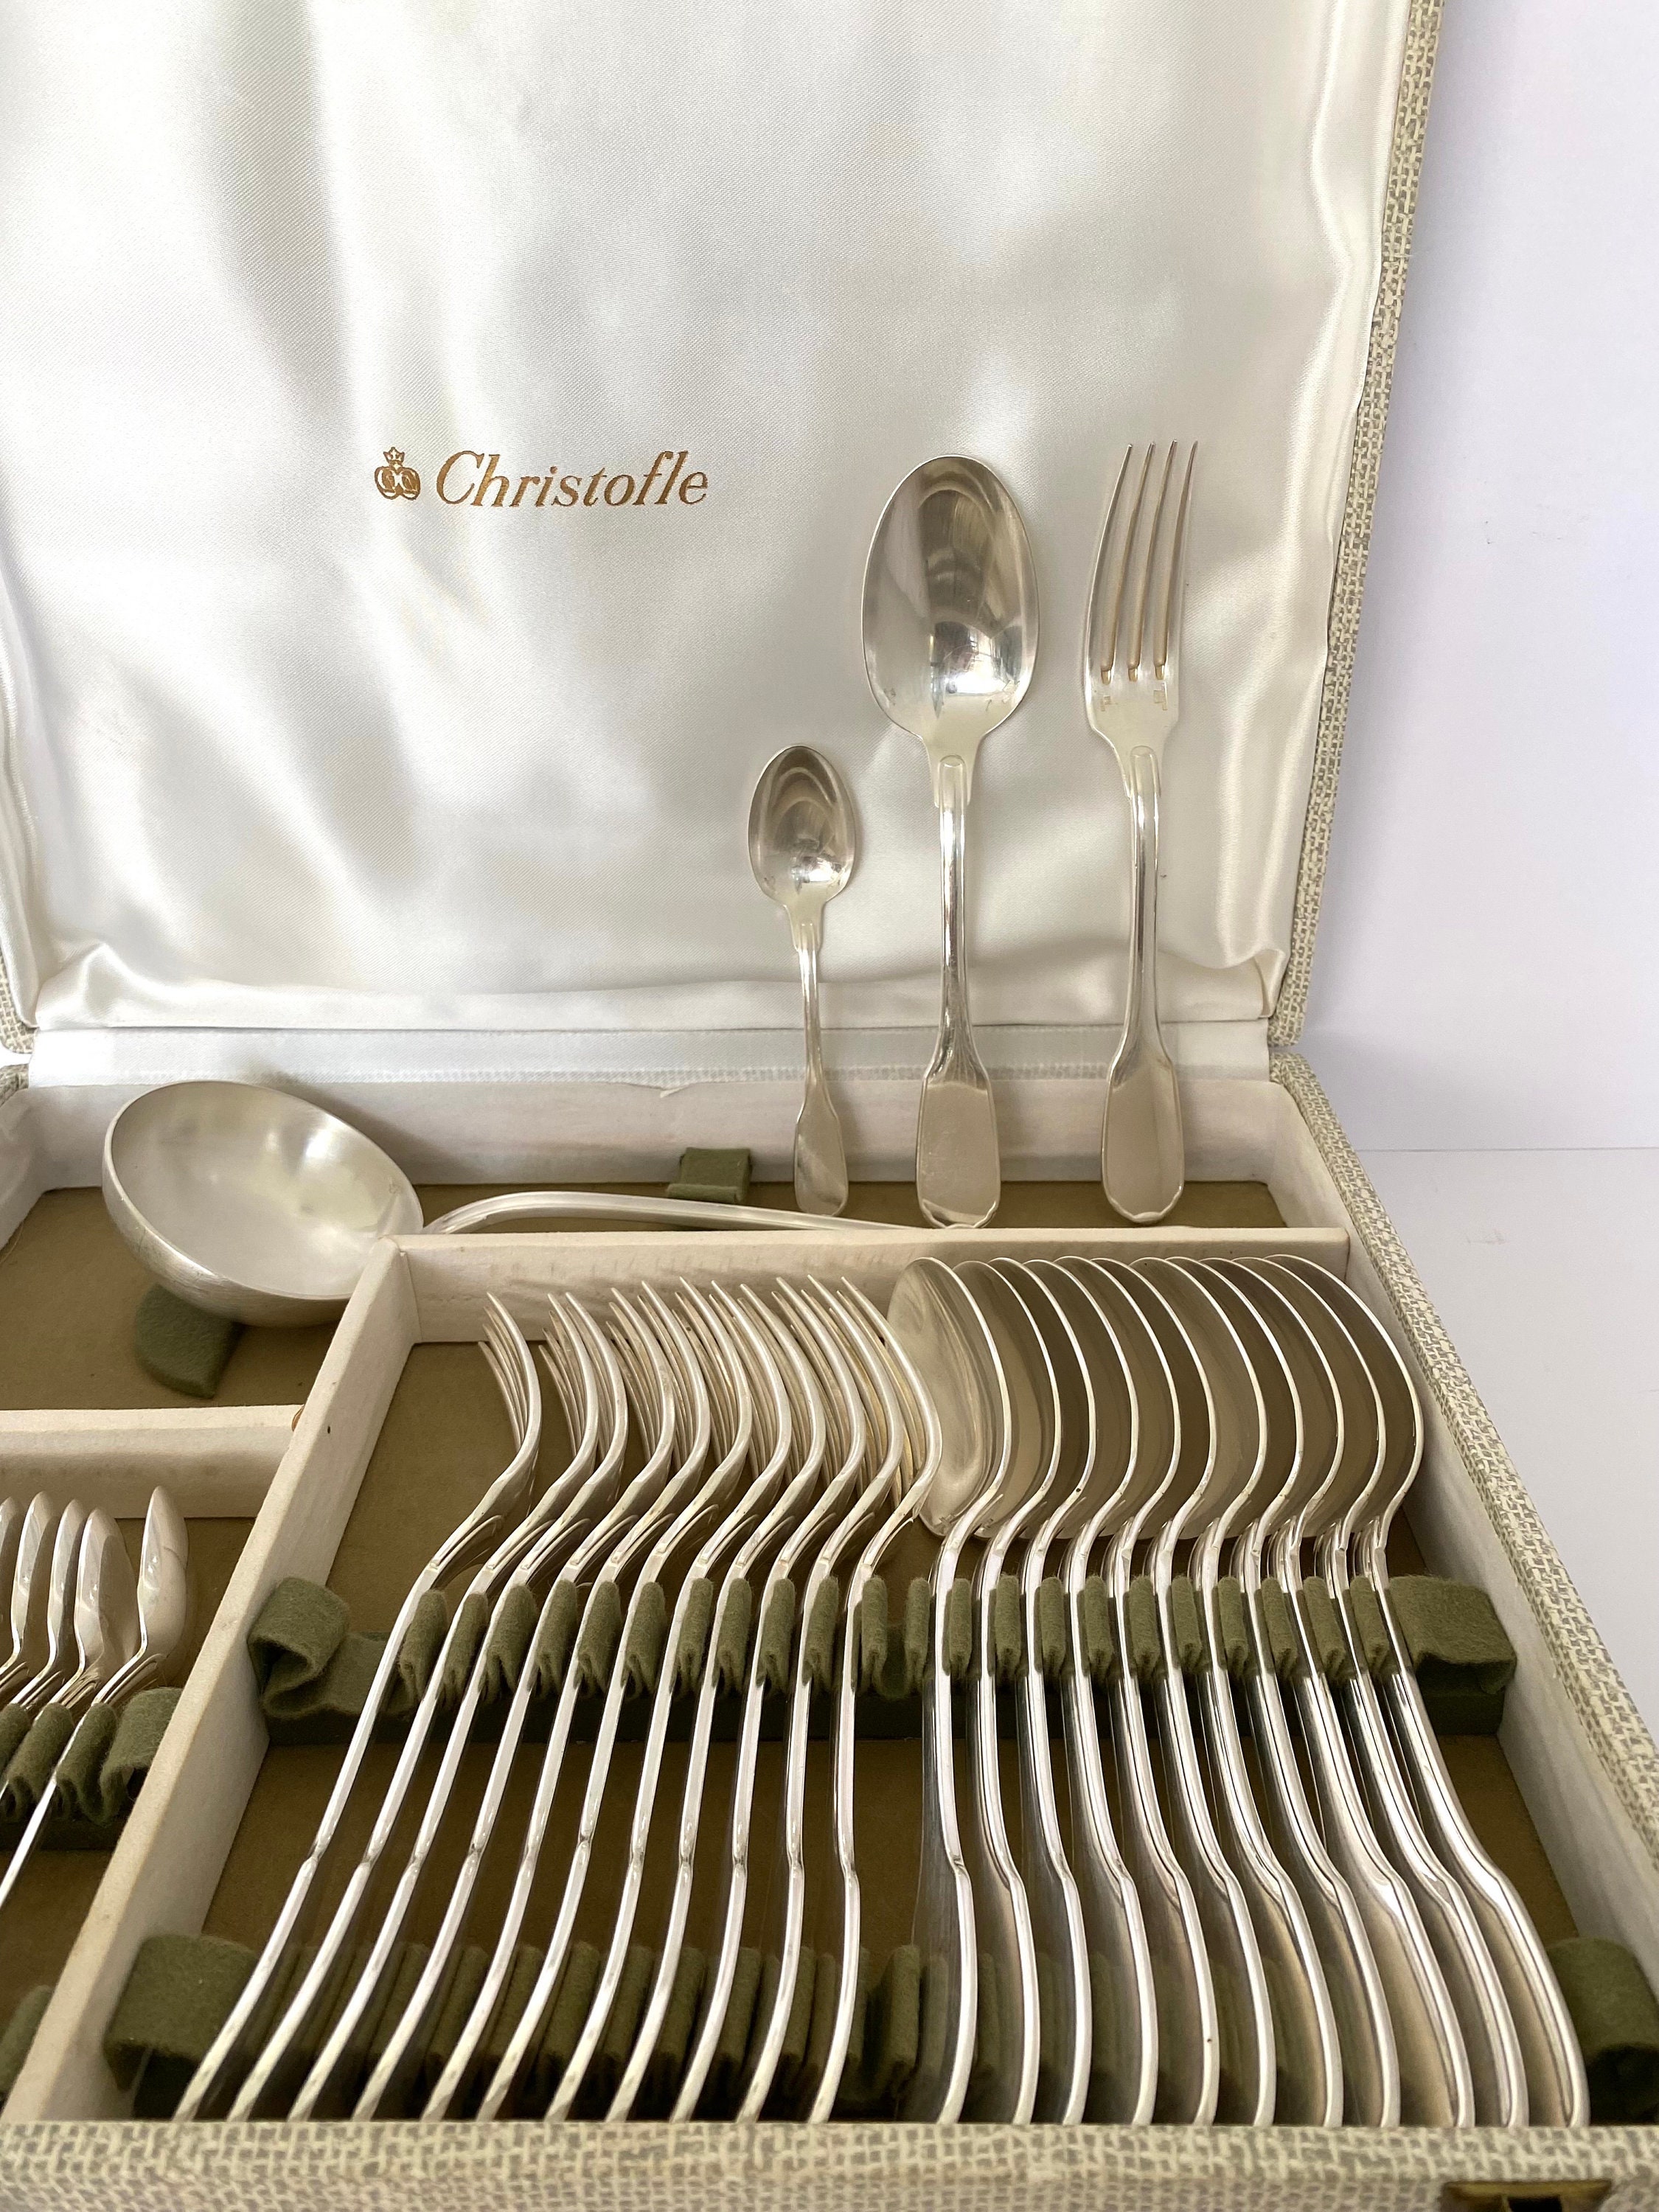 48-Piece Silver-Plated Flatware Set with Chest Malmaison